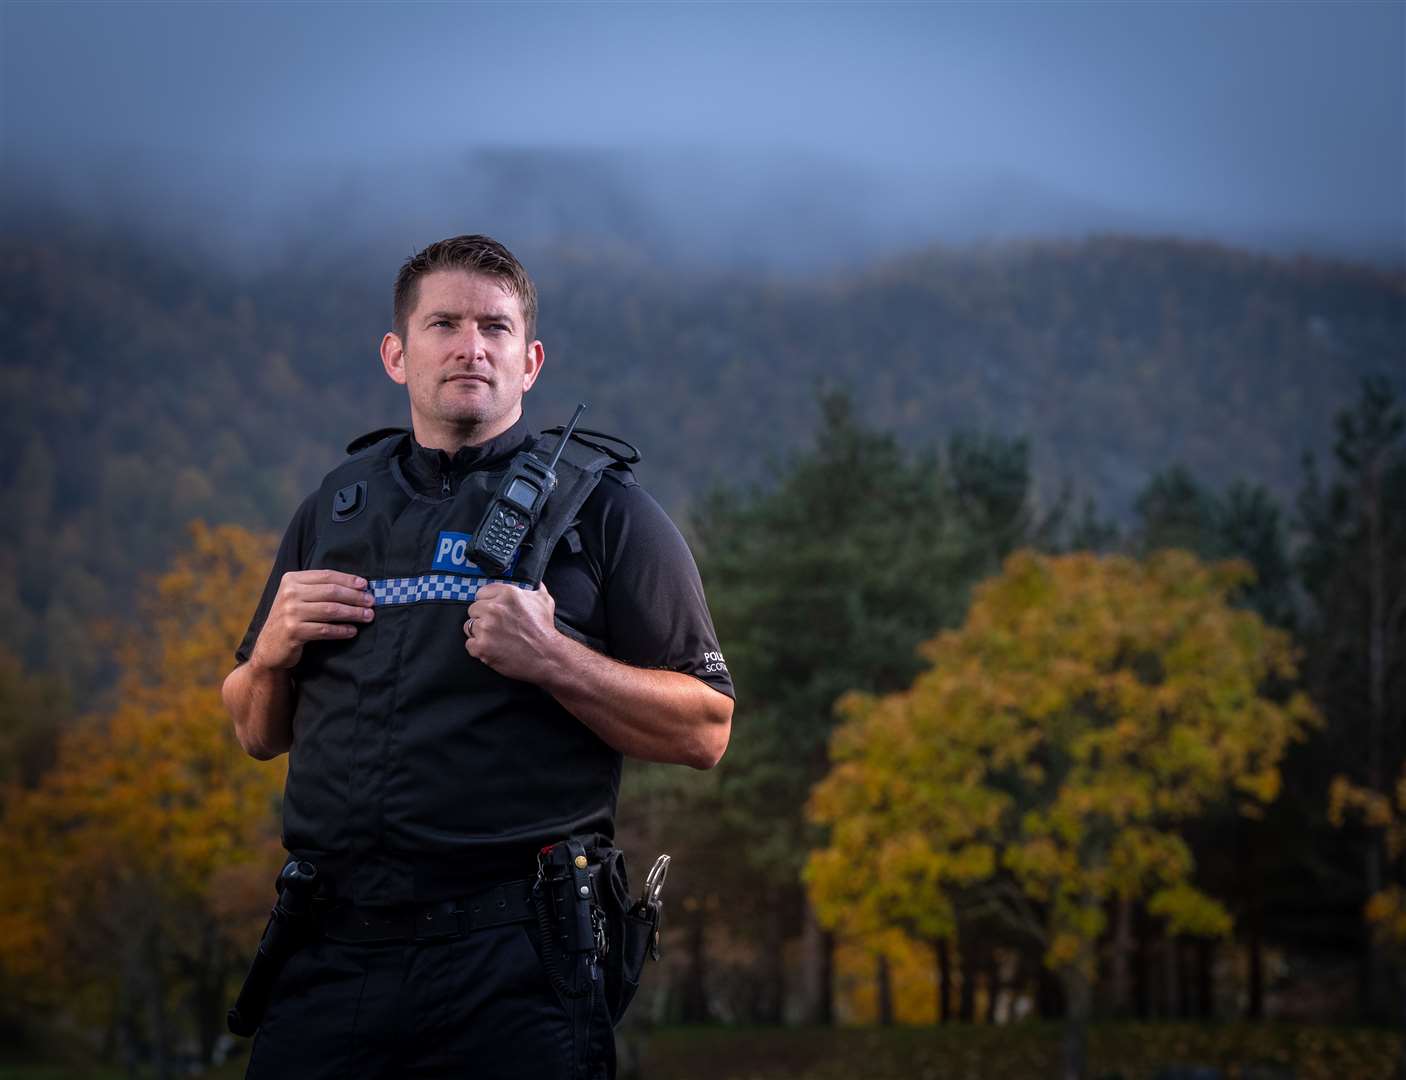 PC Paul Phillips put others before himself by putting himself in a direct line of risk. Picture: Sandy Young/scottishphotographer.com.